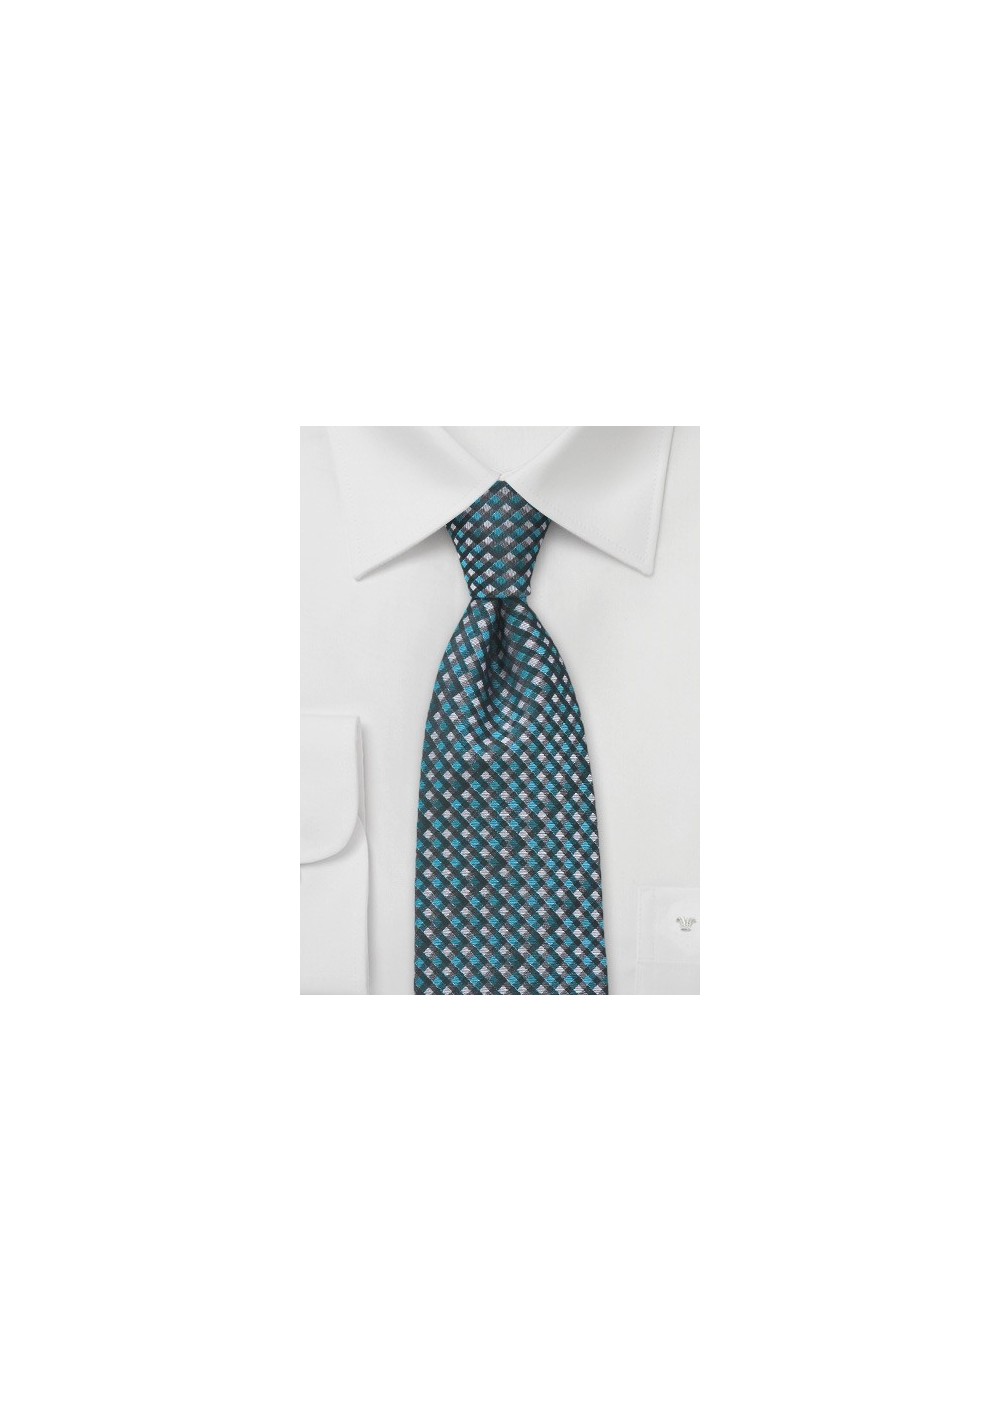 Mini Plaid Tie in Teal and Charcoal